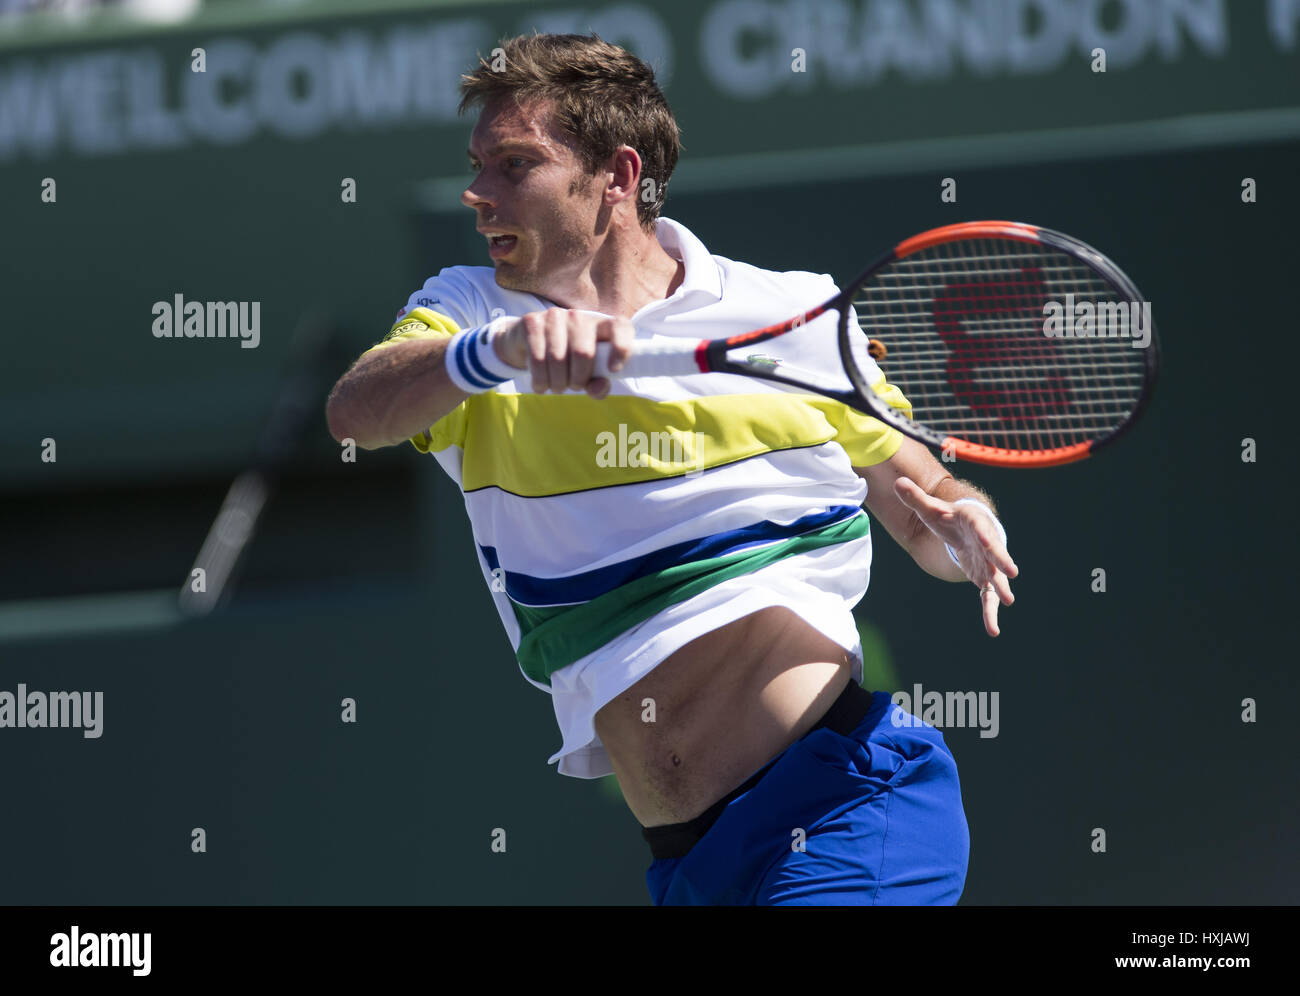 Miami, FL, USA. 28th Mar, 2017. MARCH, 28 - MIAMI, FL: Rafael Nadal (ESP) in action here against Nicolas Mahut(FRA) at the 2017 Miami Open in Key Biscayne, FL. Credit: Andrew Patron/Zuma Wire Credit: Andrew Patron/ZUMA Wire/Alamy Live News Stock Photo